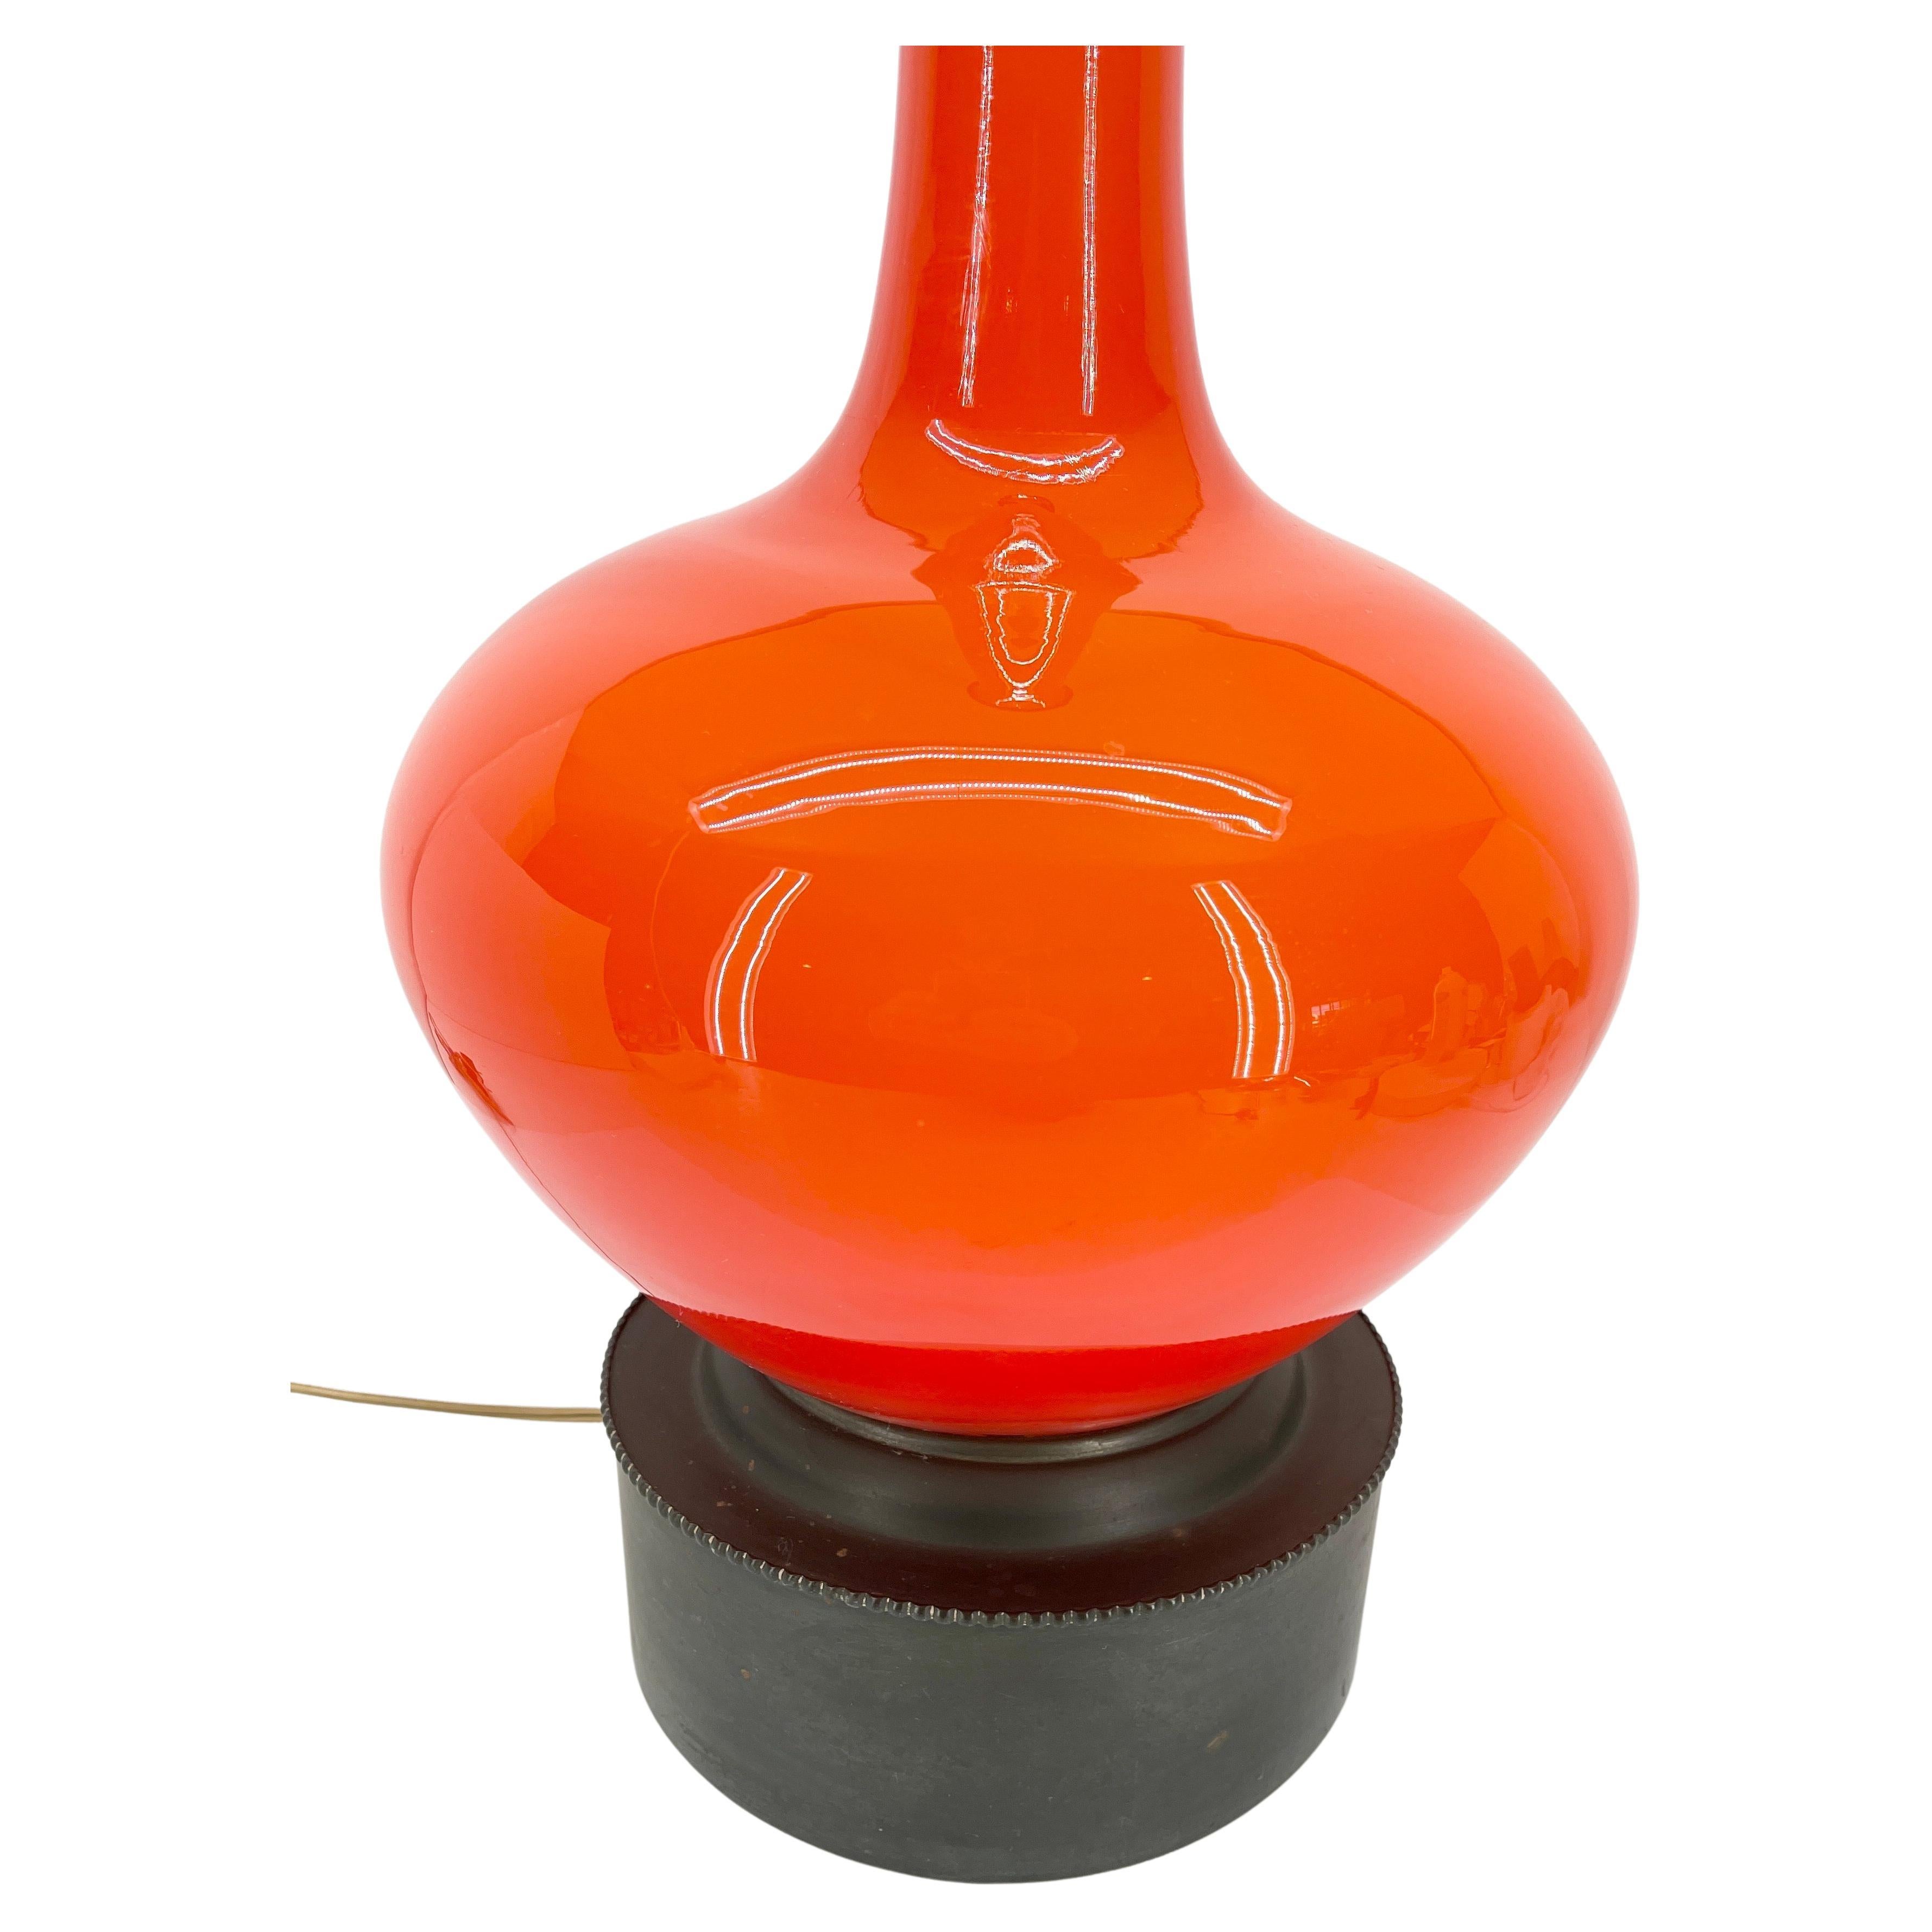 Tall Mid-Century Modern orange glass table lamp, Italy 1960's.
The lamp is very tall and is striking in it's bold orange colored glass. The base is solid vintage brass. The lamp is in very good condition and has been newly rewired. The orange glass